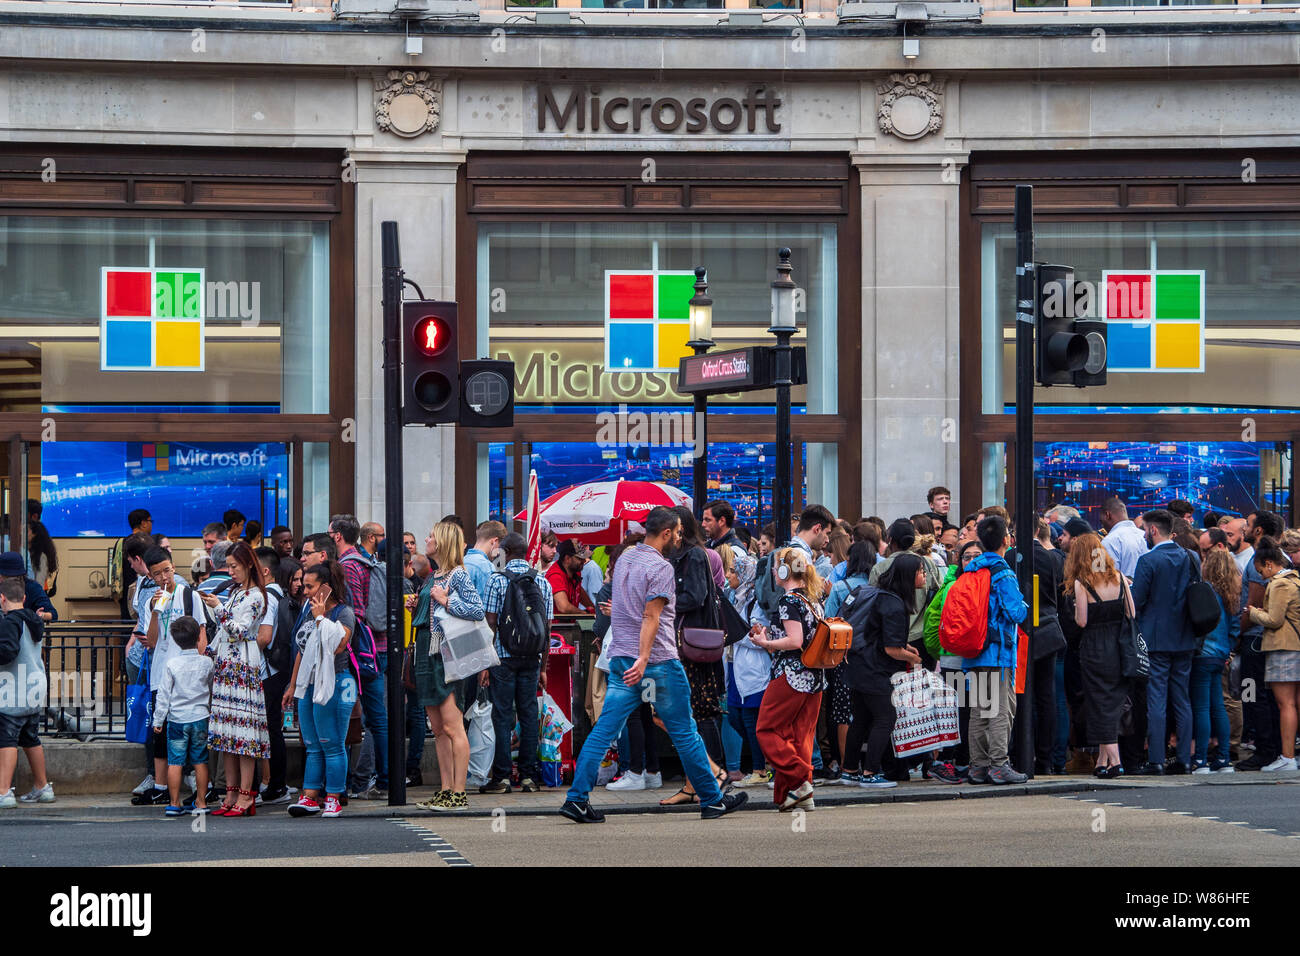 Microsoft Store Oxford Circus London - Microsoft Oxford Circus - the new Microsoft store on Oxford Street in London's West End. Opened 2019. Stock Photo